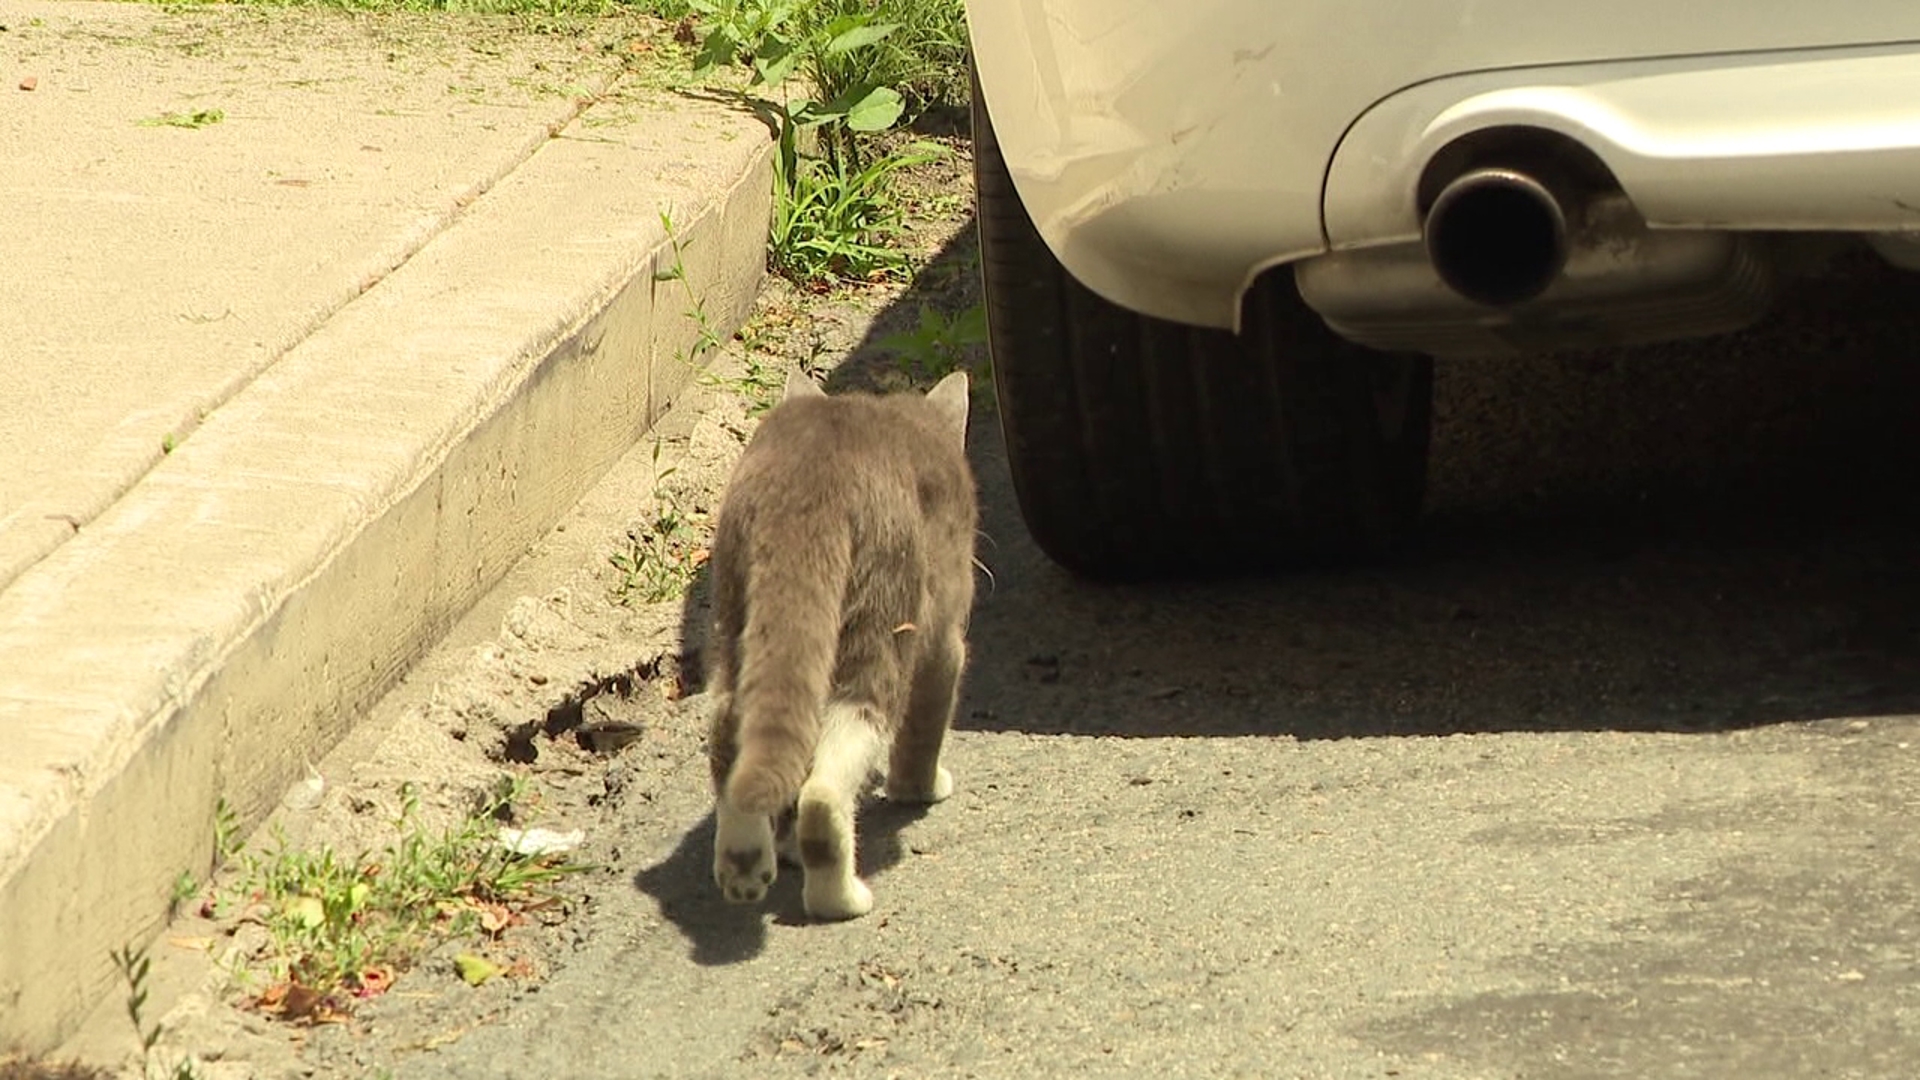 People can now be fined or jailed for feeding or sheltering strays in Schuylkill County. Cat-lover Patrick Marone worries about the new fate stray cats are facing.